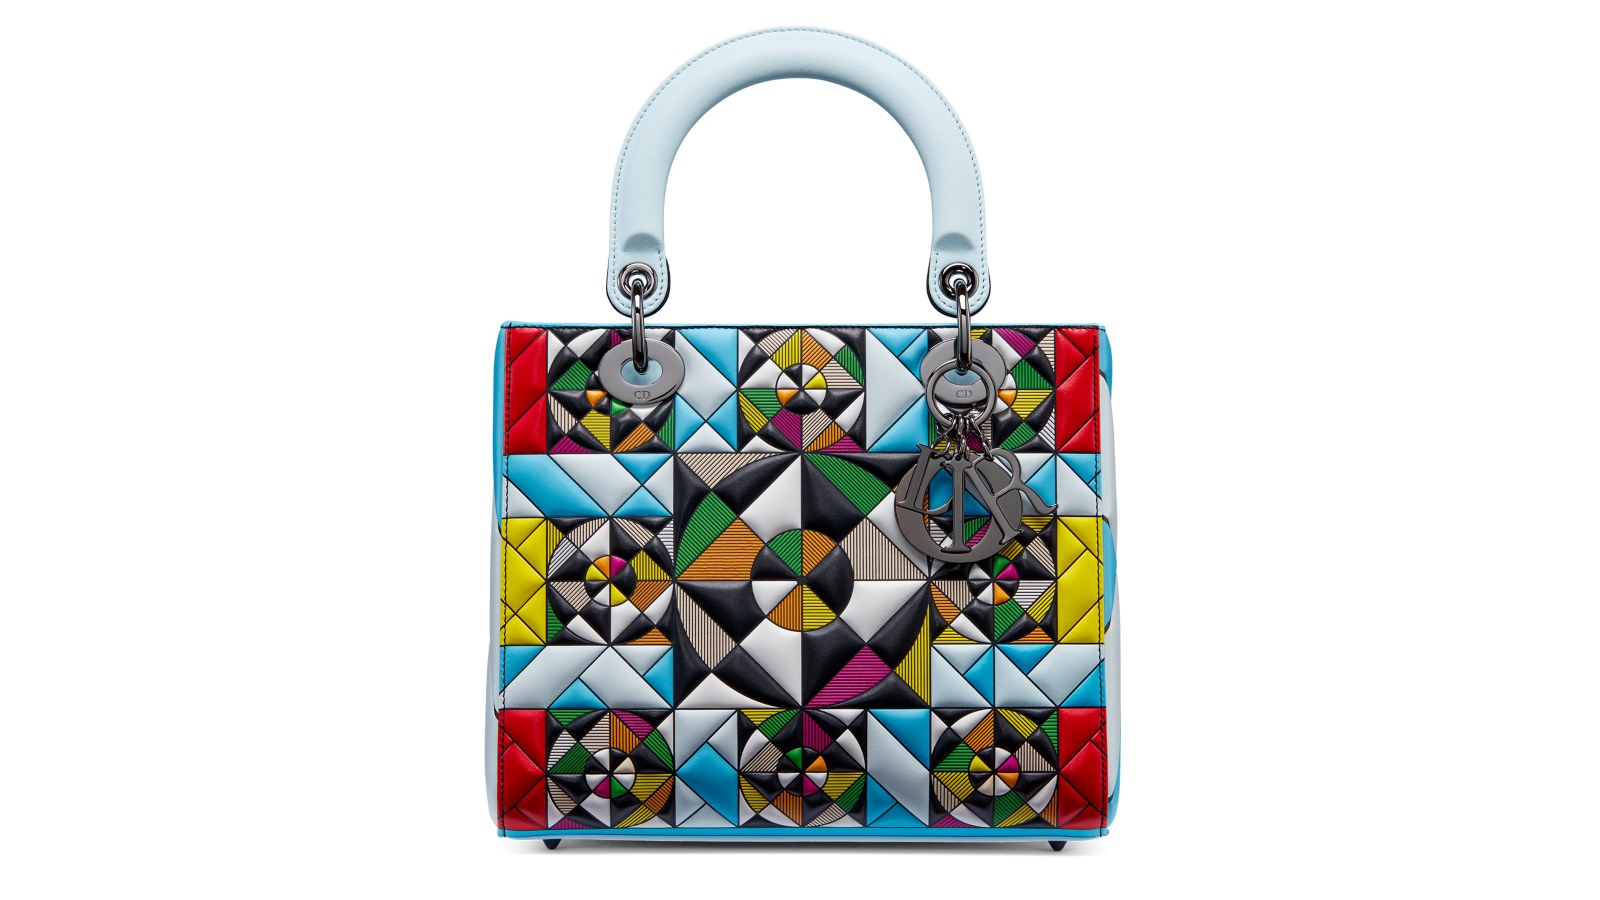 This Very Limited-Edition Lady Dior Bag Has Arrived In Kuala Lumpur ...